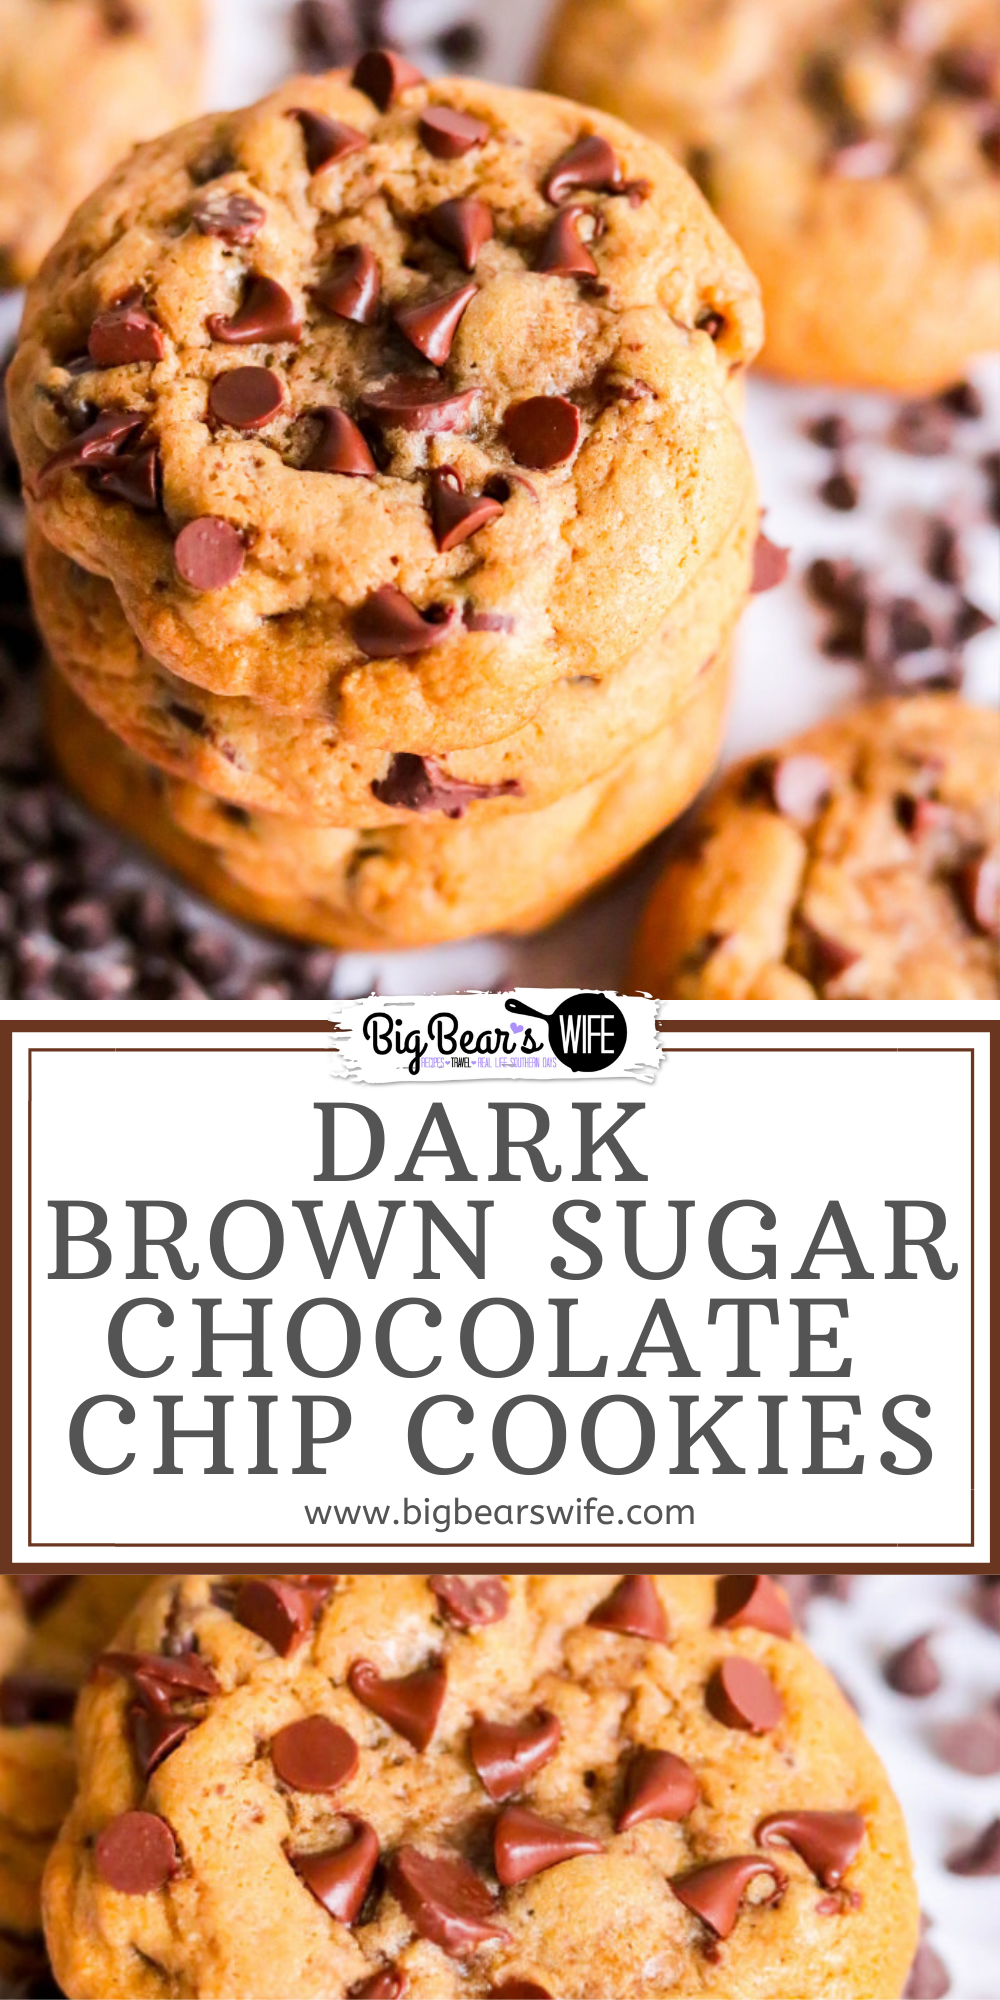 These Dark Brown Sugar Chocolate Chip Cookies might be the best chocolate chip cookie ever. Chilling the dough gives the cookie a soft and chewy texture and they’re packed tons of chocolate chips!  via @bigbearswife